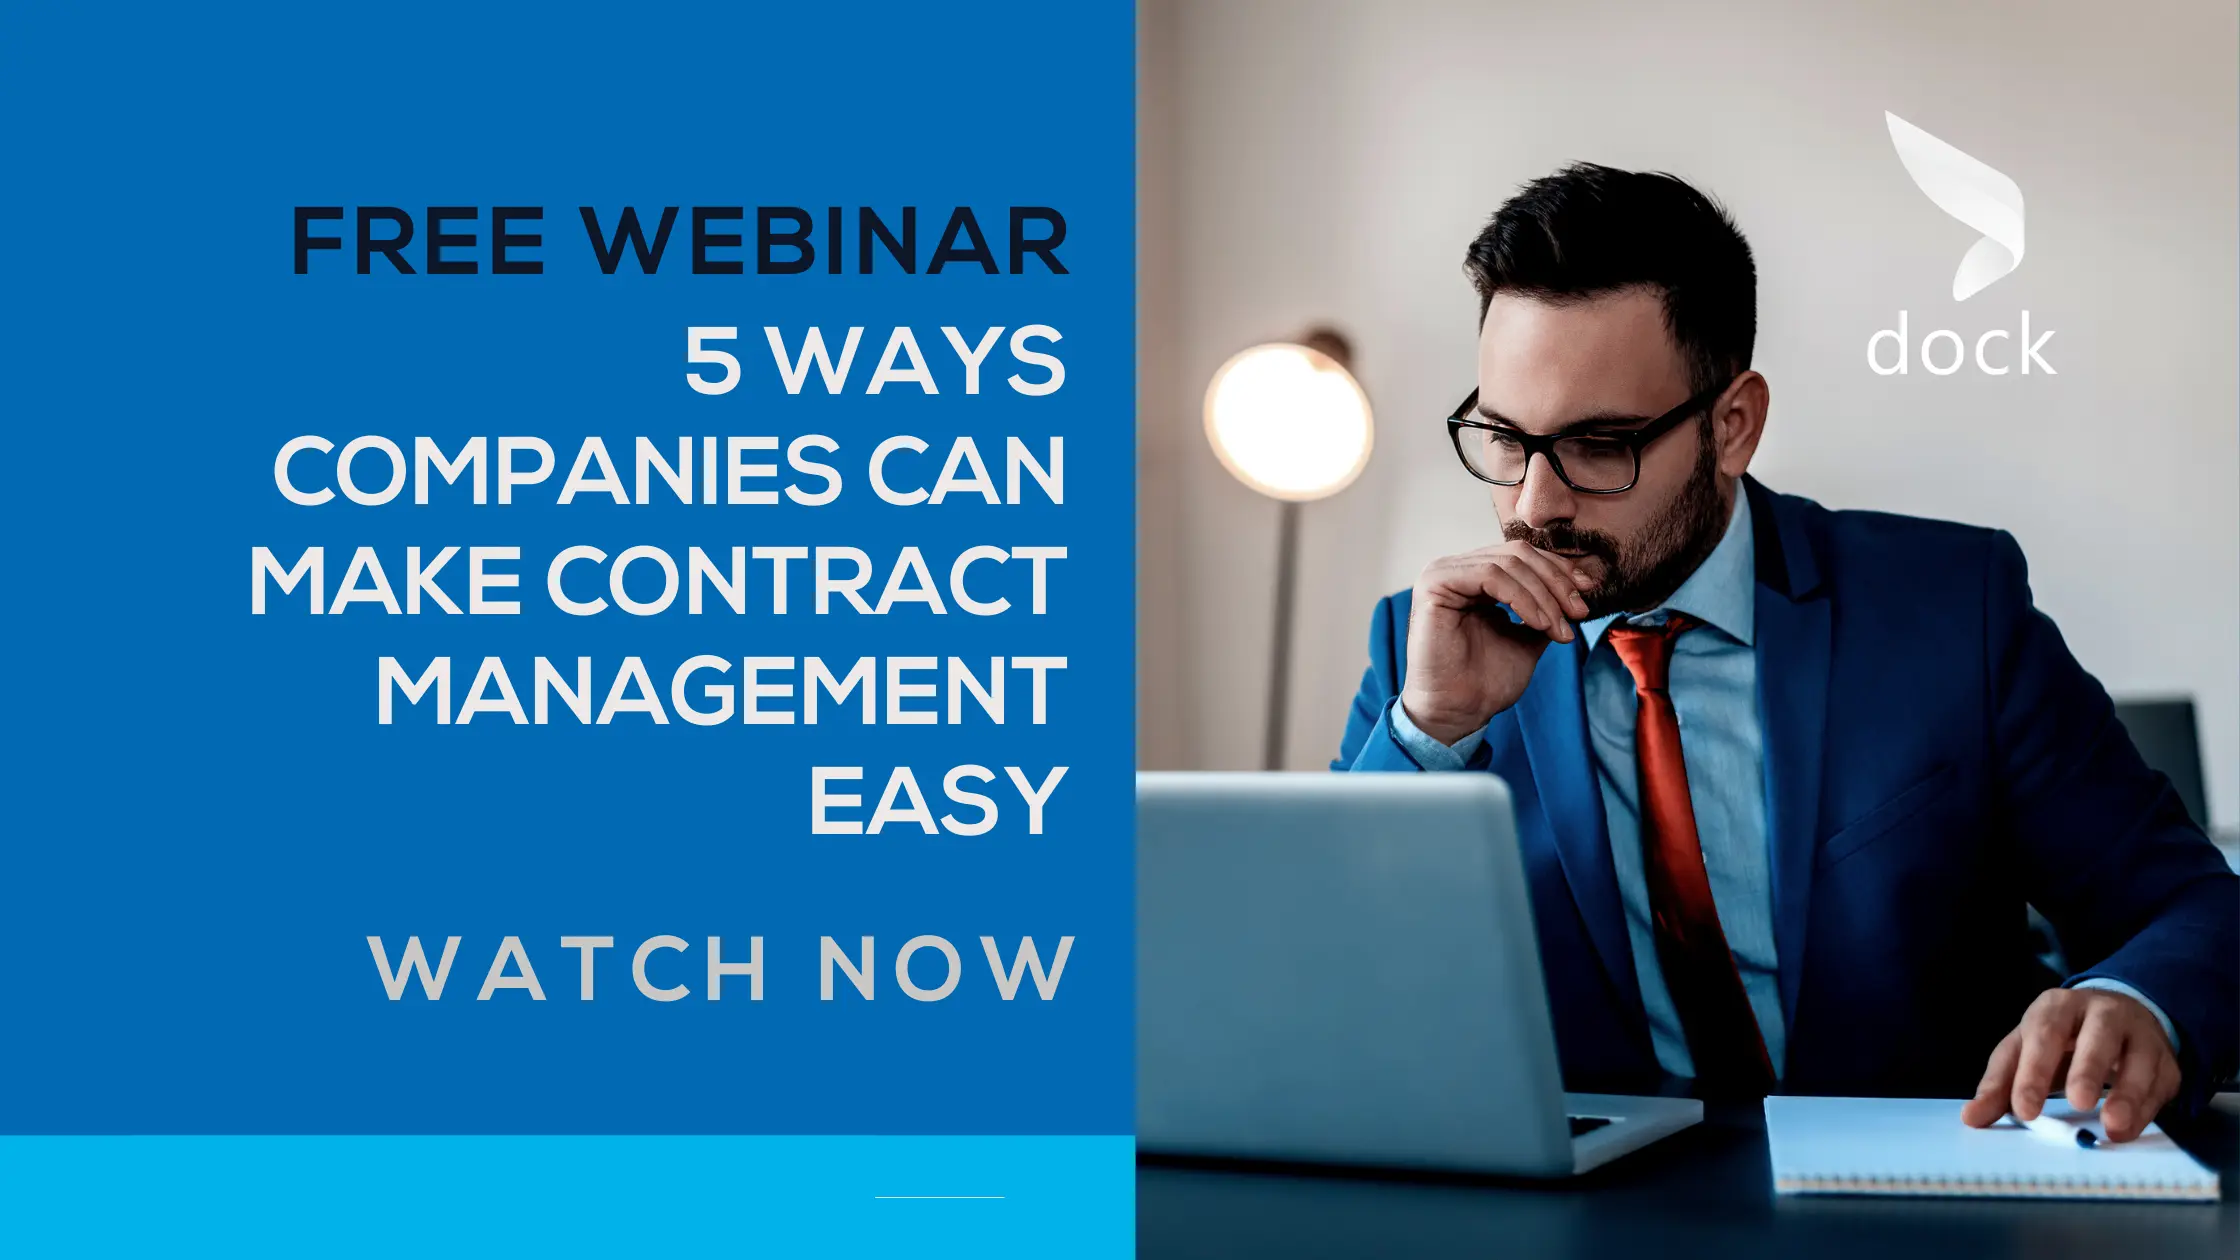 webinar - 5 Ways Companies Can Make Contract Management Easy.